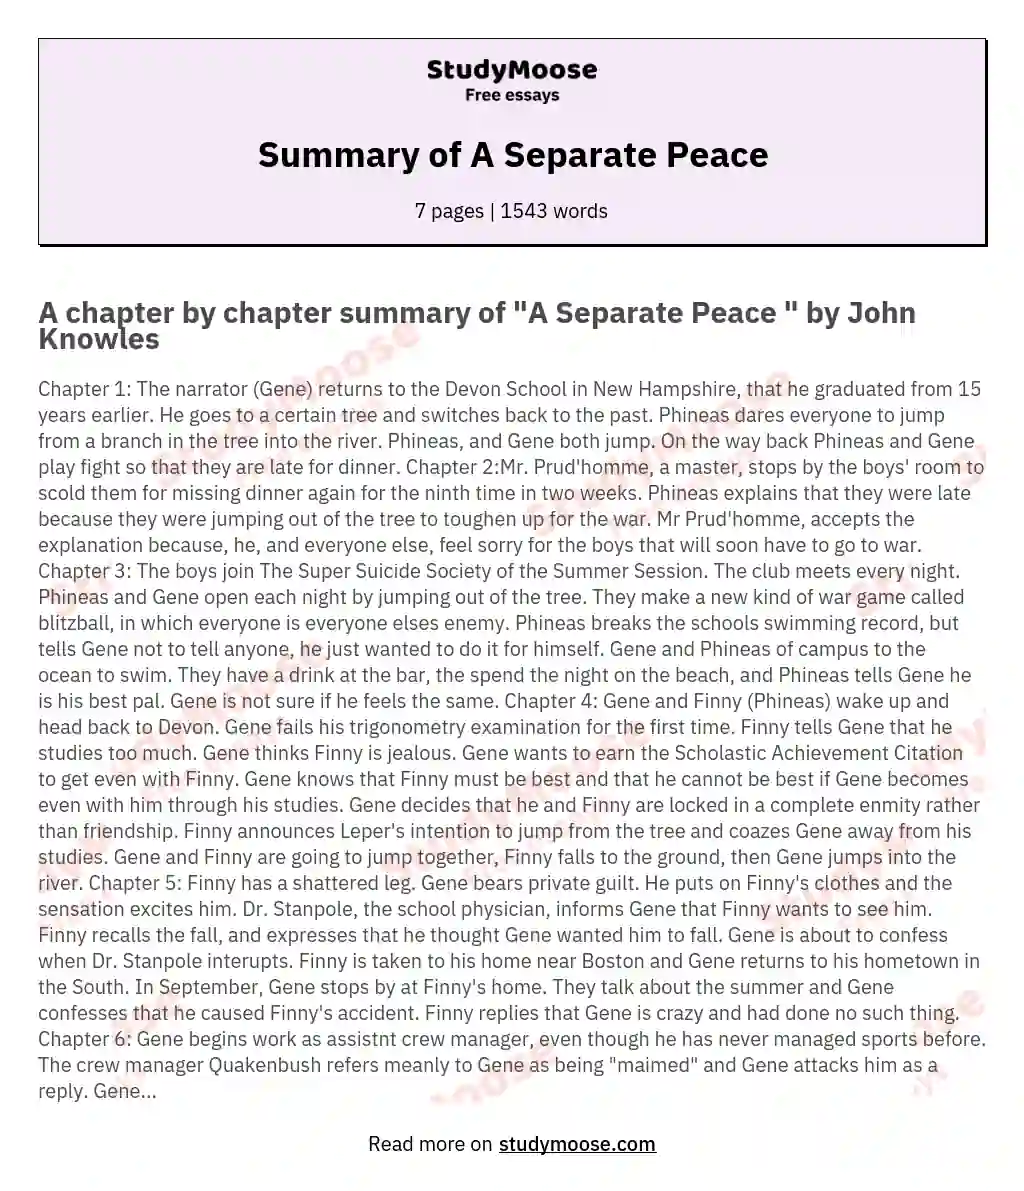 essay on a separate peace